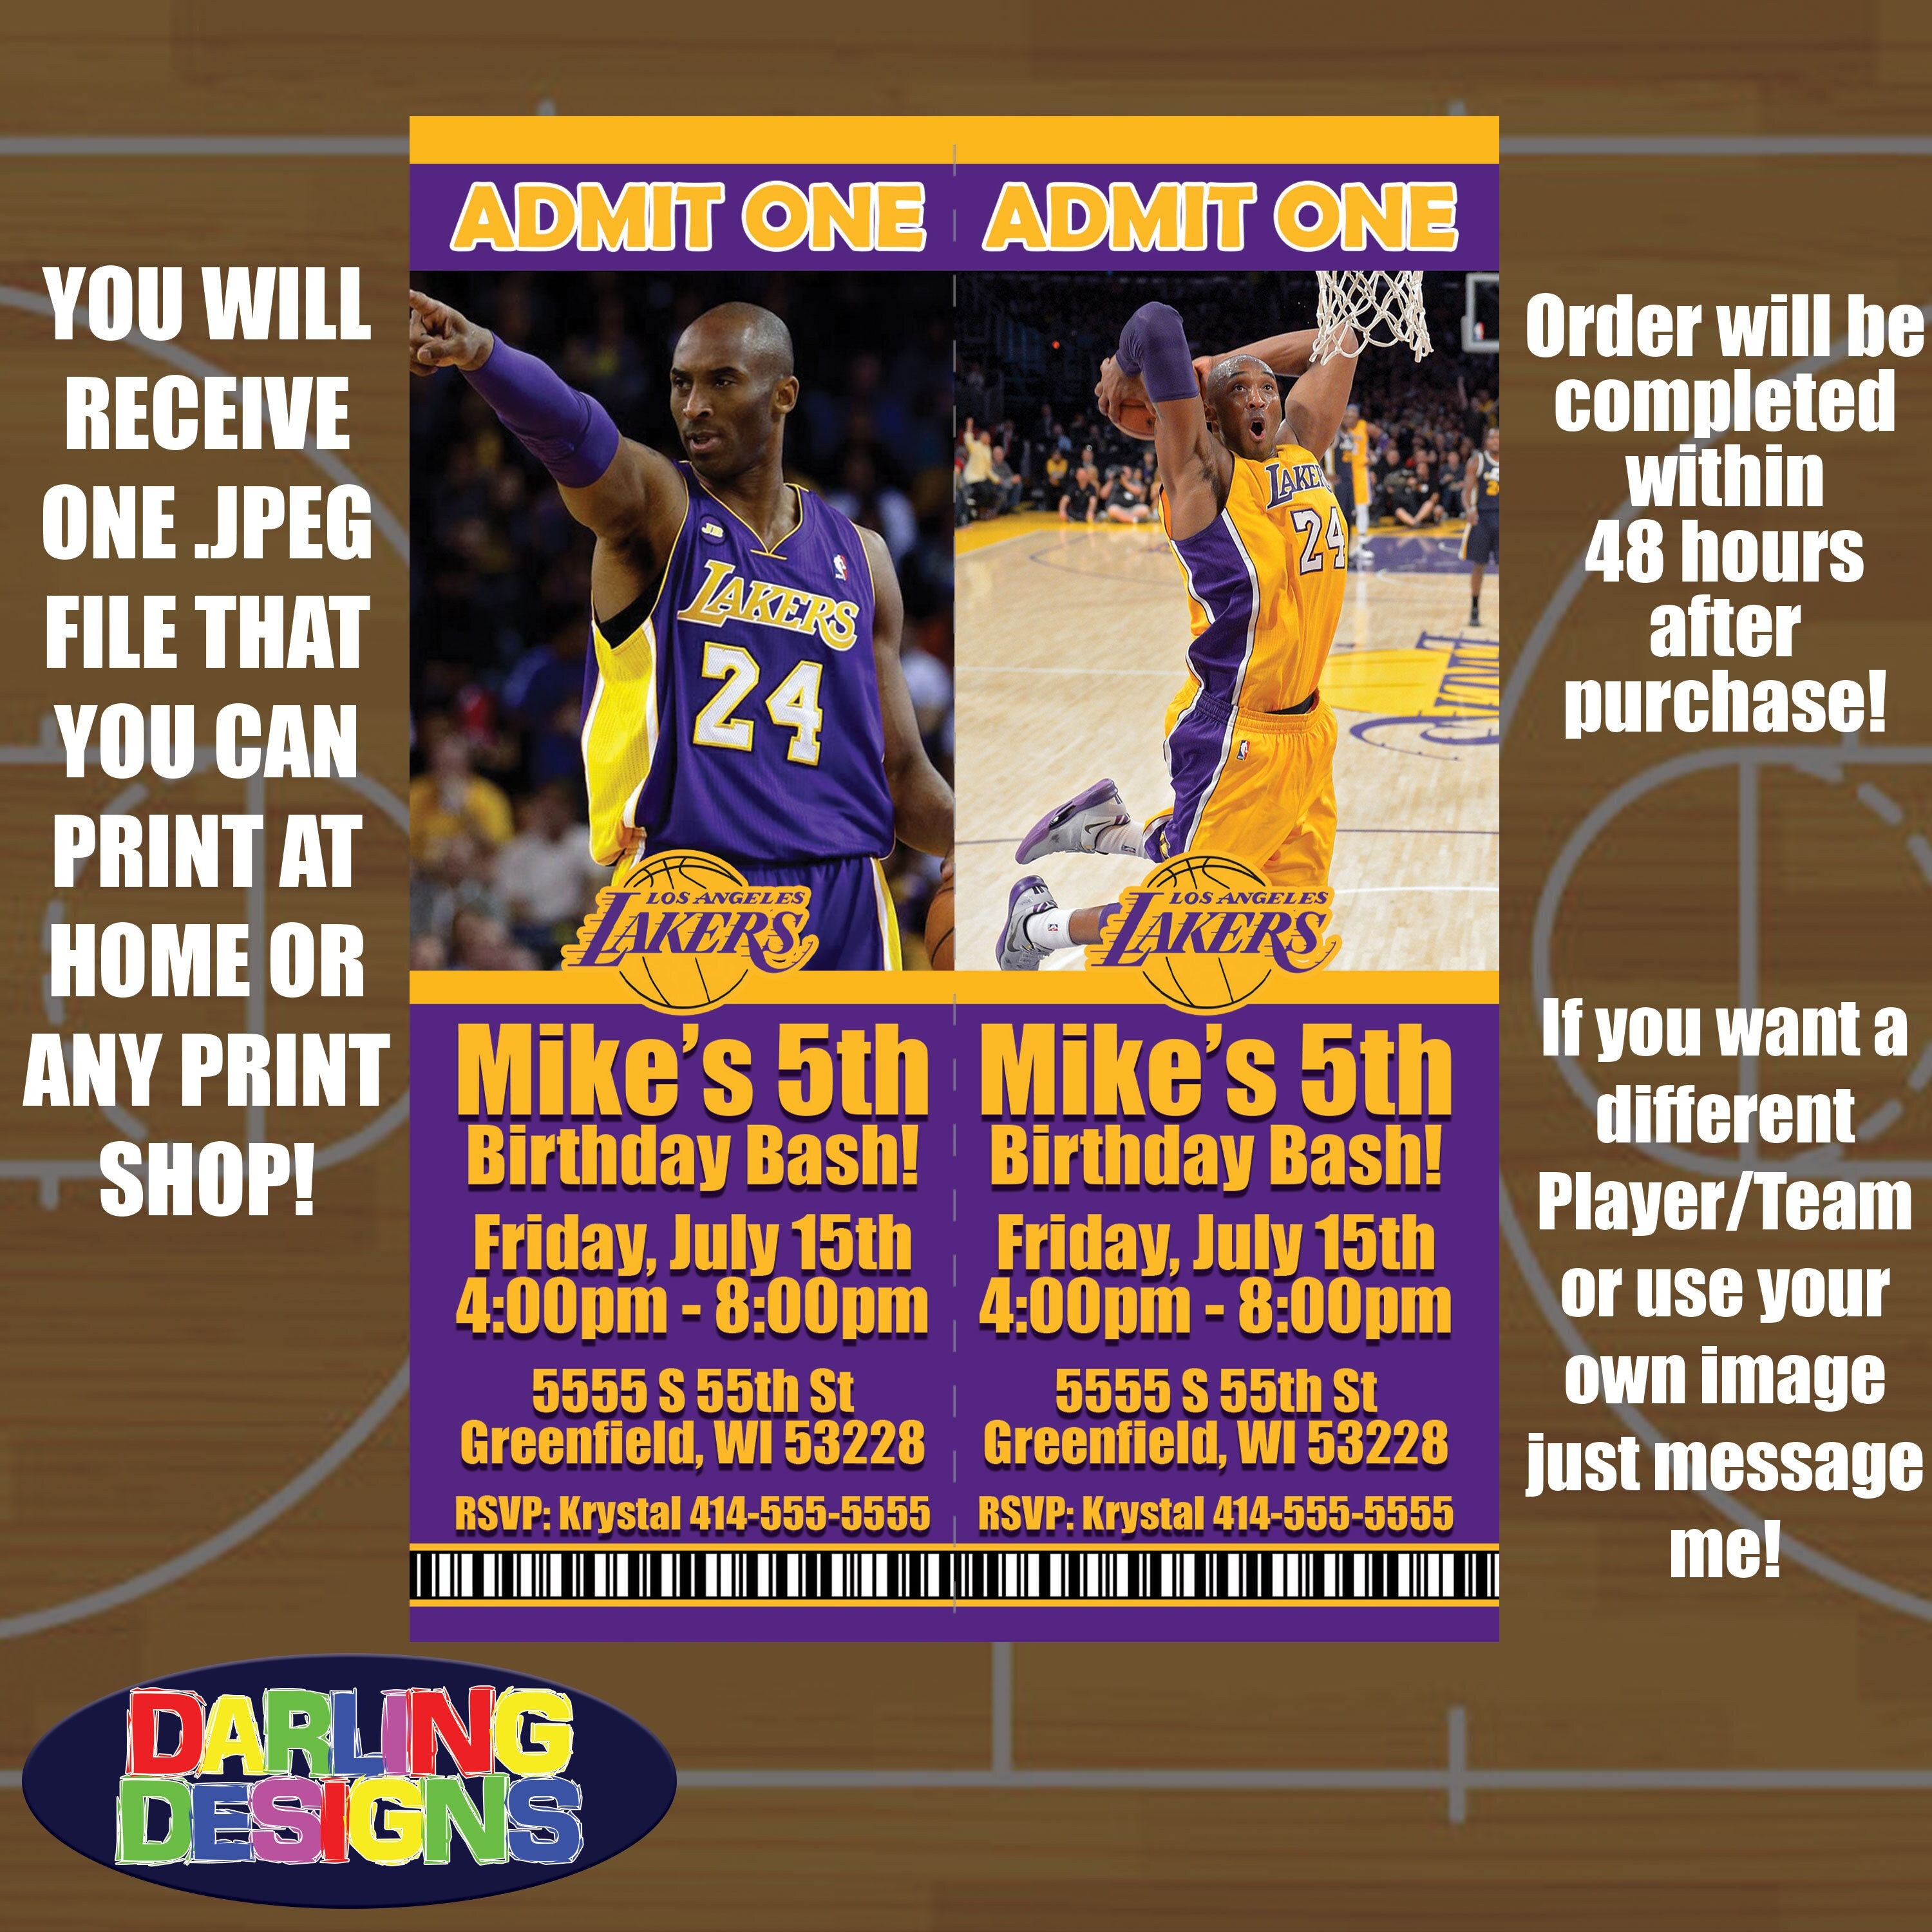 Selling 3 Lakers night dodger tickets (9/1 black mamba dodger jersey  giveaway) : r/lakers